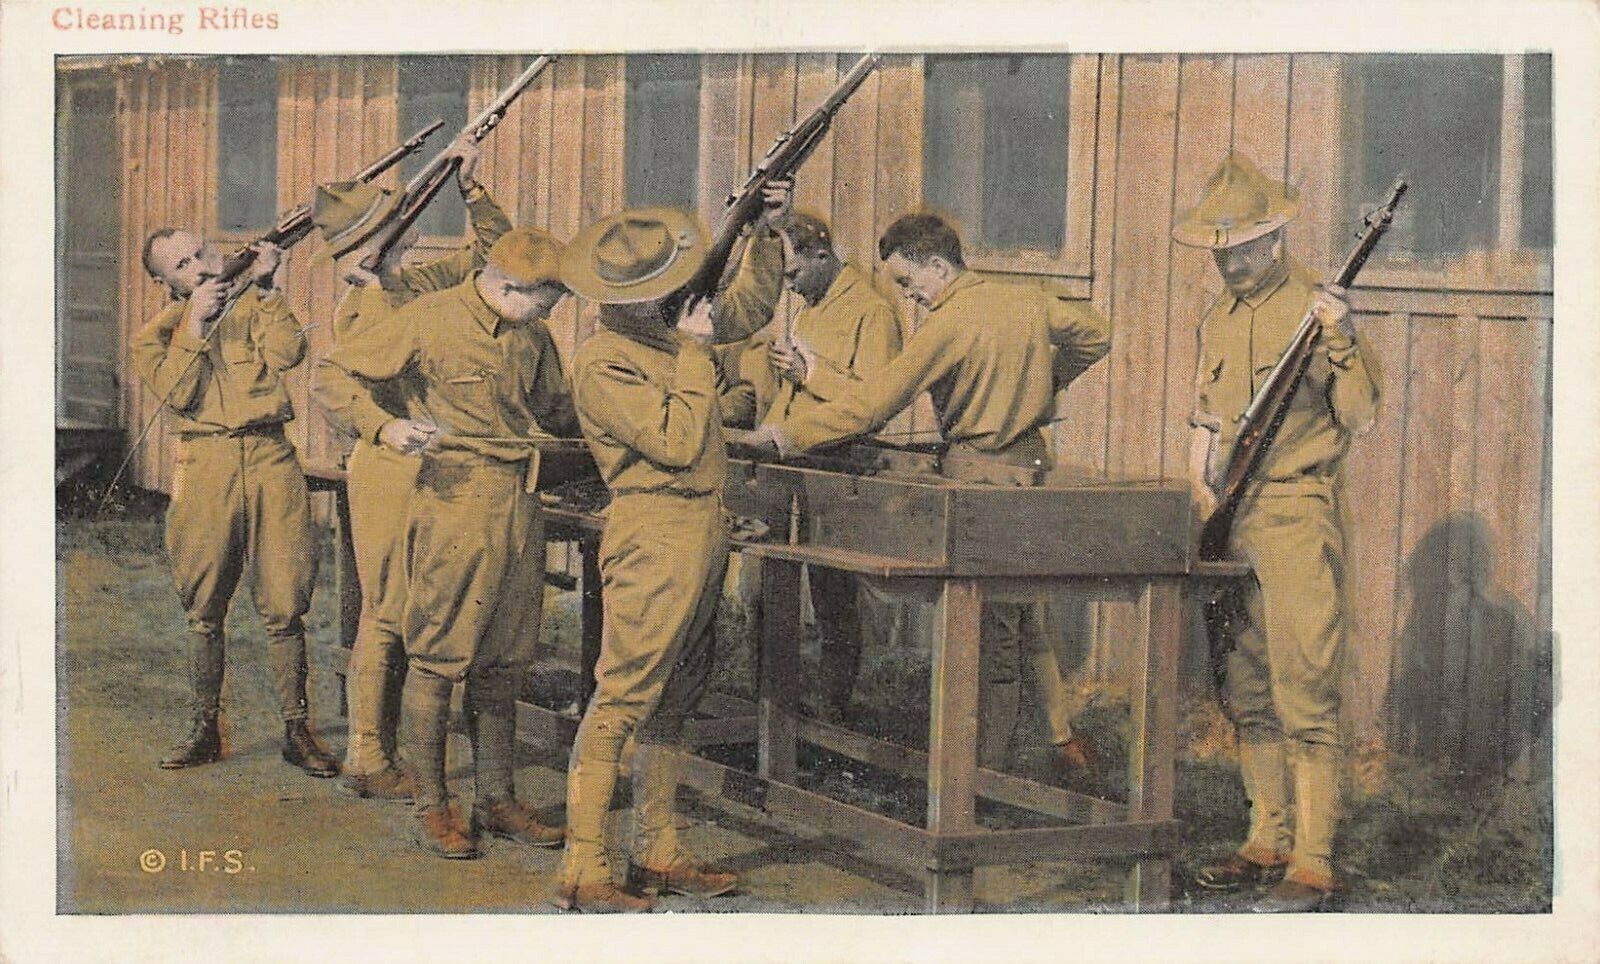 United States Army Soldiers Cleaning Rifles early postcard, Unused 